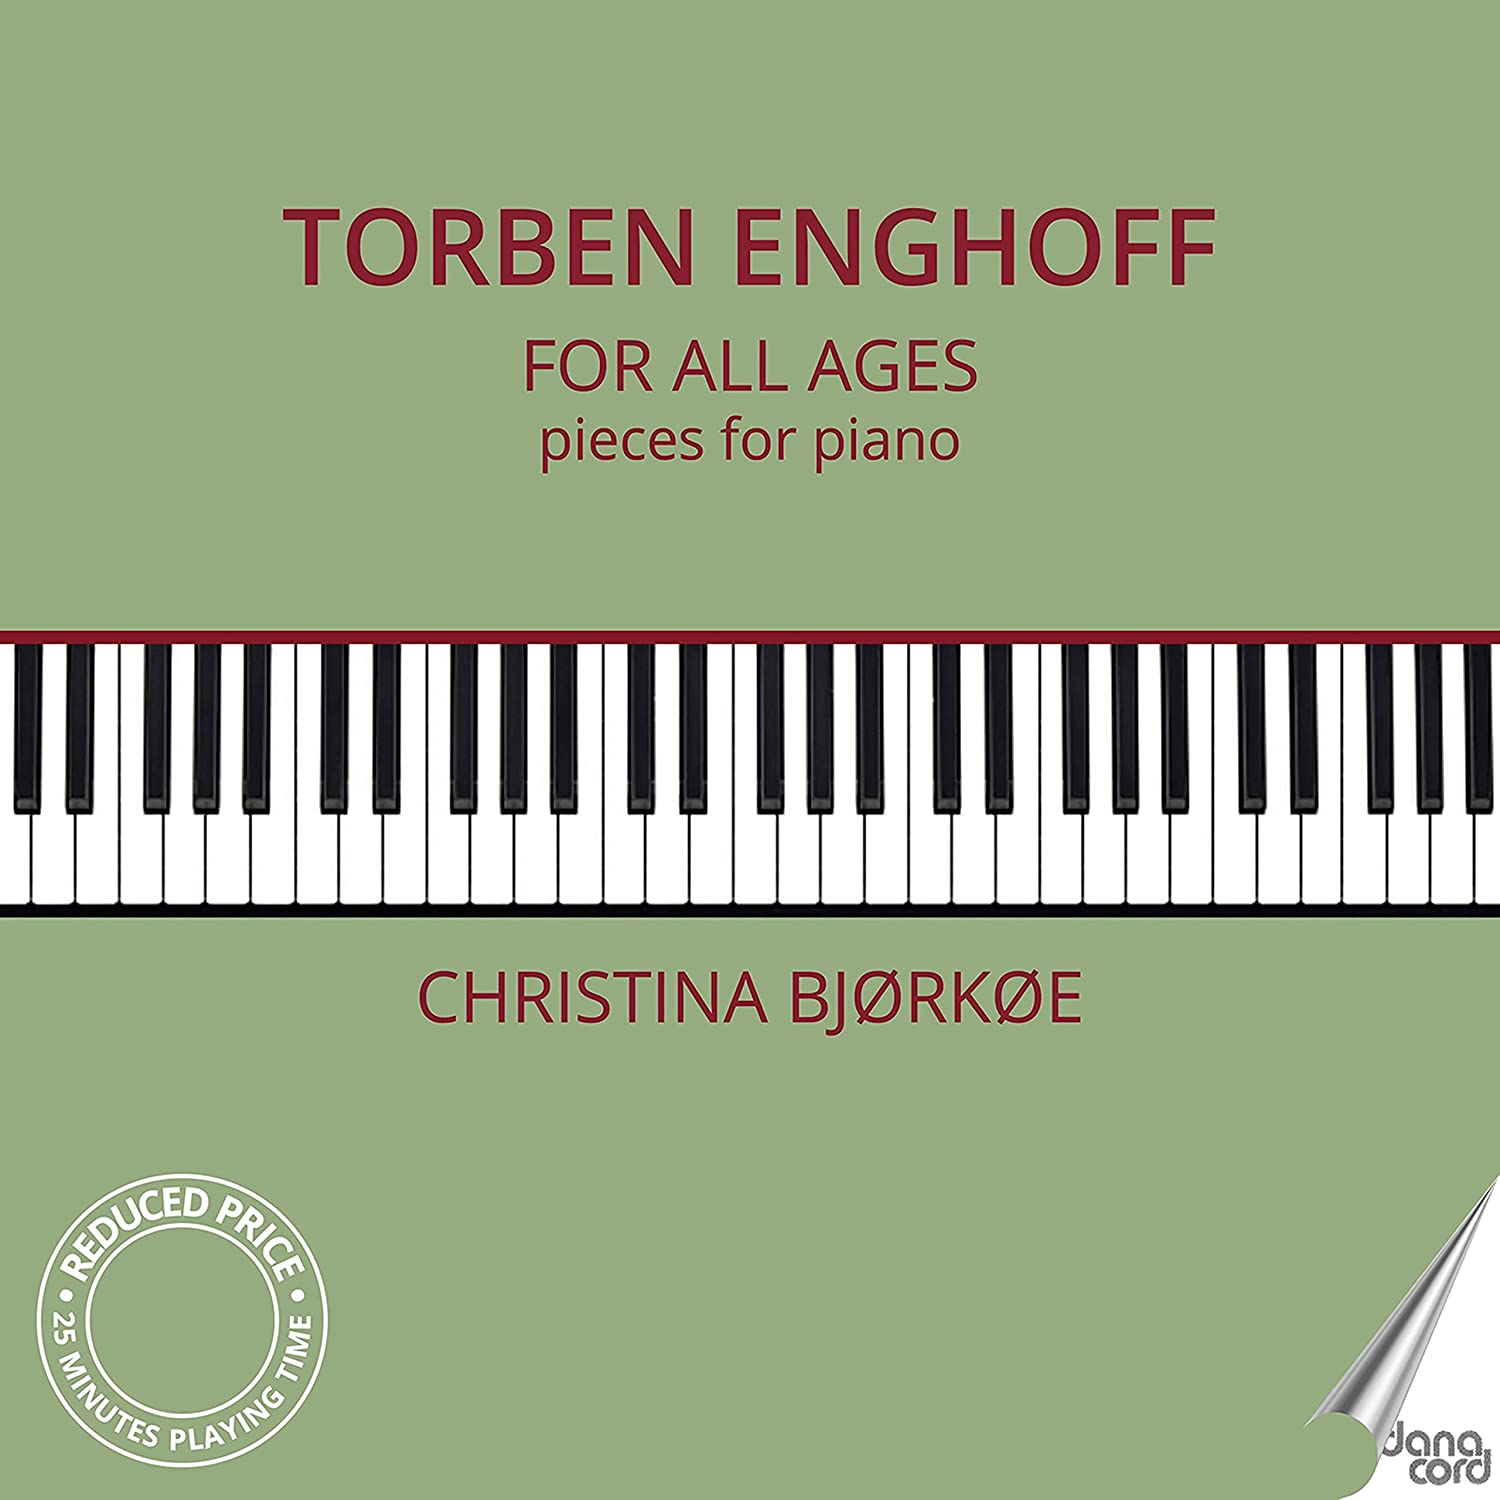 TORBEN ENGHOFF: FOR ALL AGES - PIECES FOR PIANO